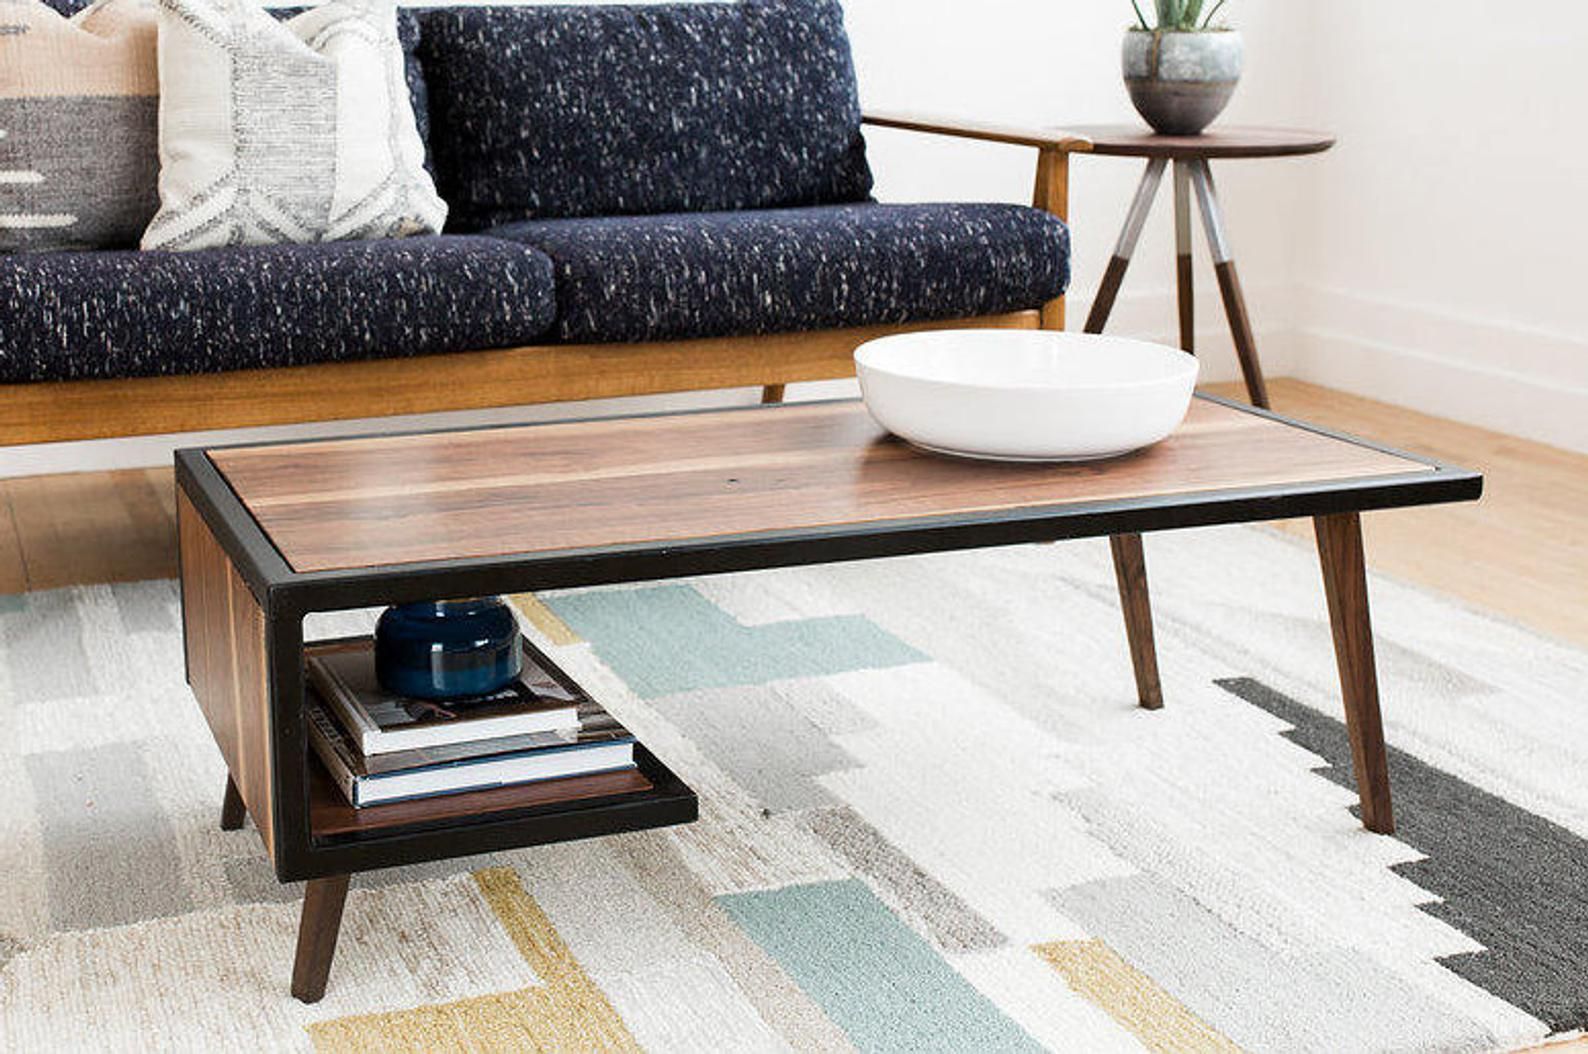 Mid Century Modern Style Coffee Tables You'll Love – Home In Mid Century Modern Coffee Tables (View 11 of 15)